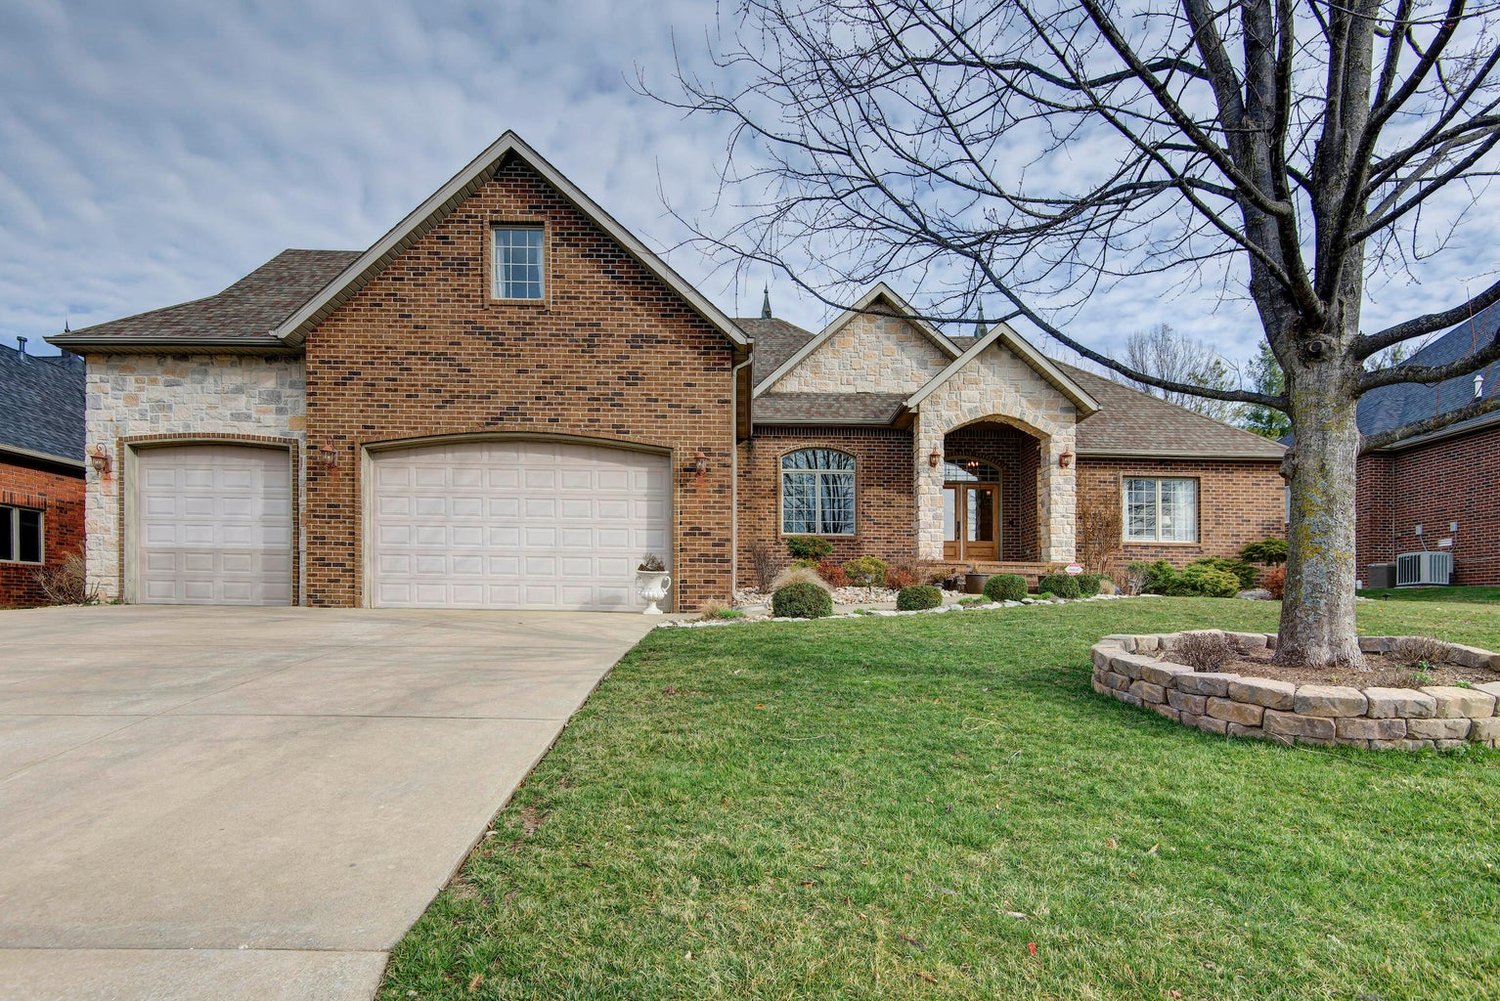 3941 E. Windsmore Drive
$560,000
Bedrooms: 4
Bathrooms: 3
Listing firm: Keller Williams Greater Springfield